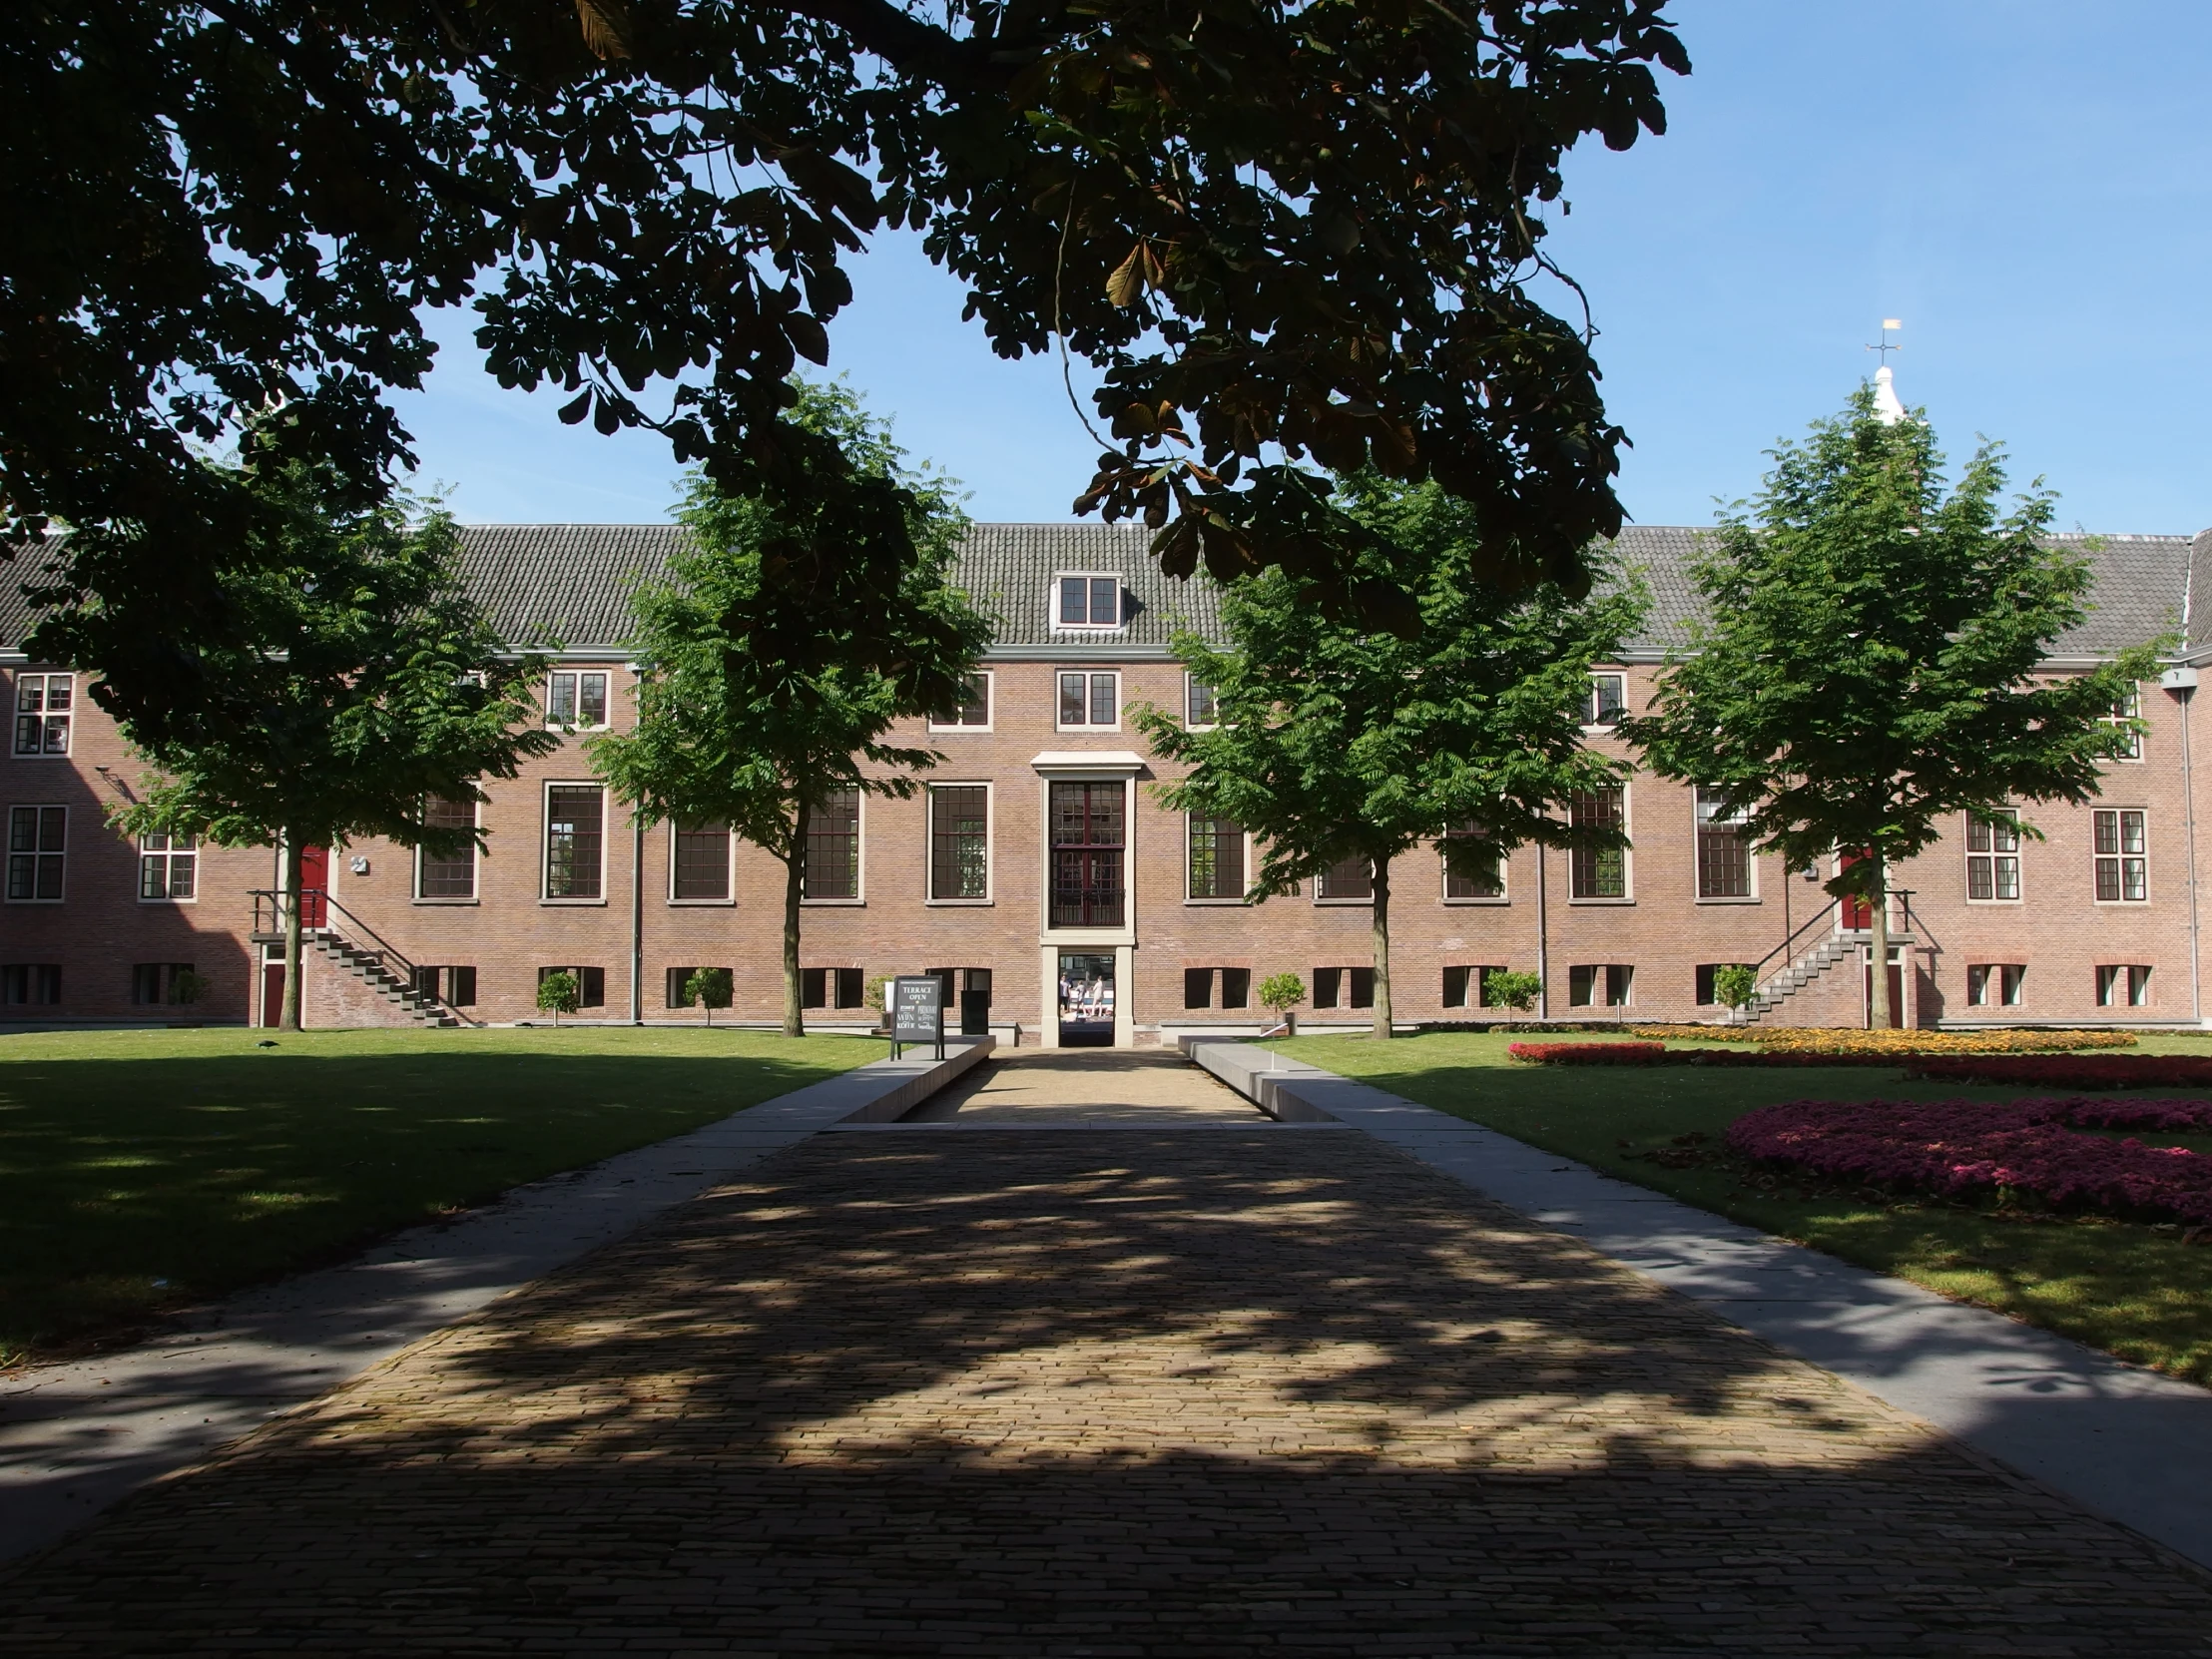 view of a path in front of a large brick building